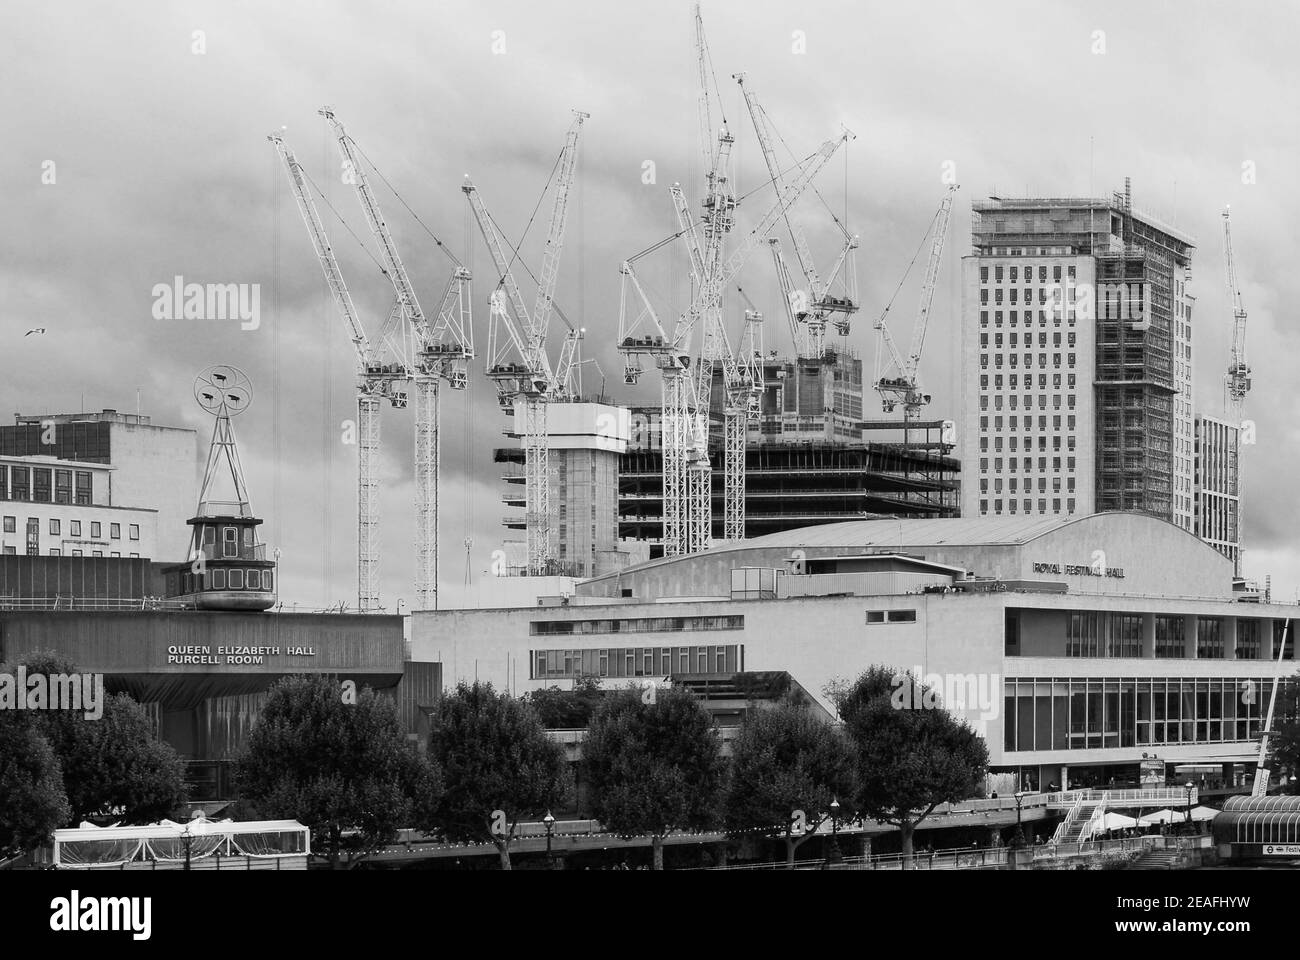 Monochrome image of cranes dominating the South Bank skyline, behind the Royal Festival Hall on the banks of the River Thames in London. Stock Photo